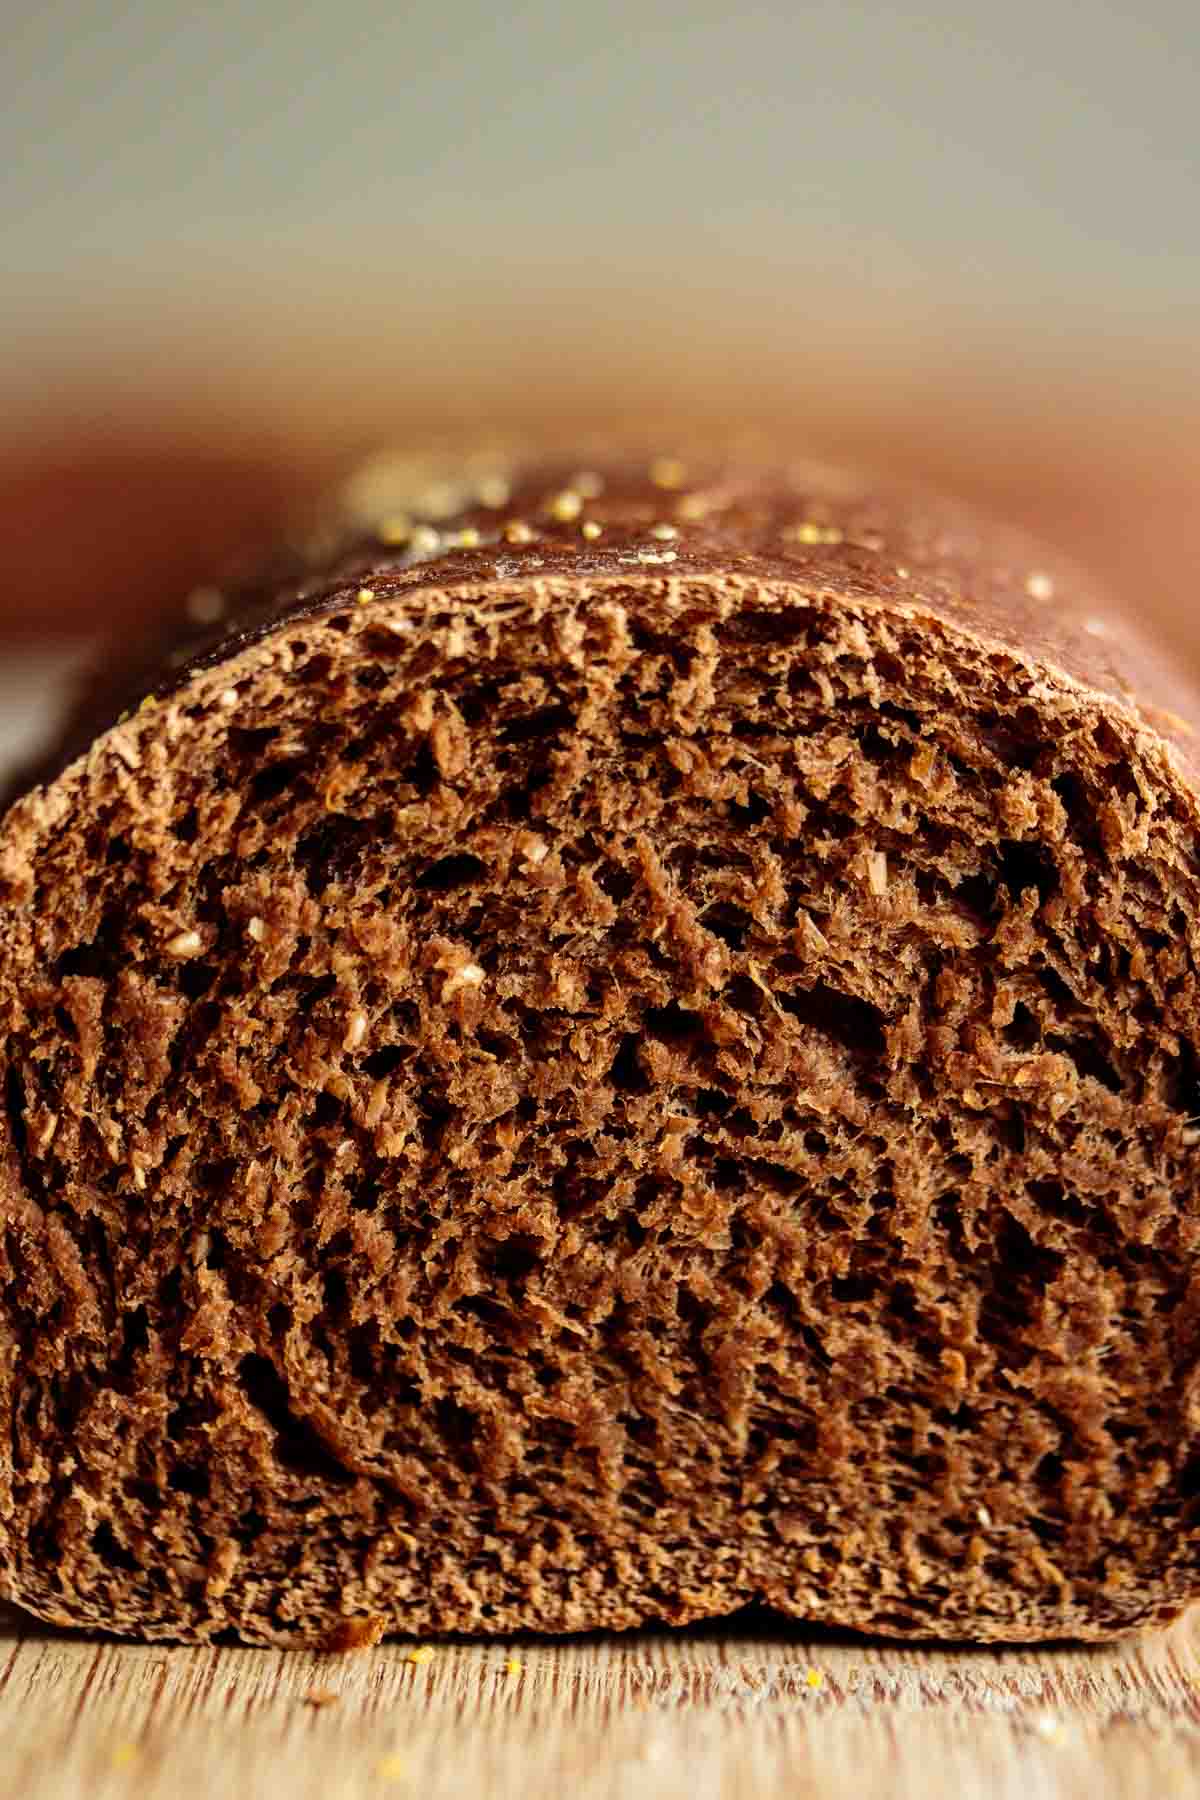 Close up showing chewy brown crumb of a sliced roll.